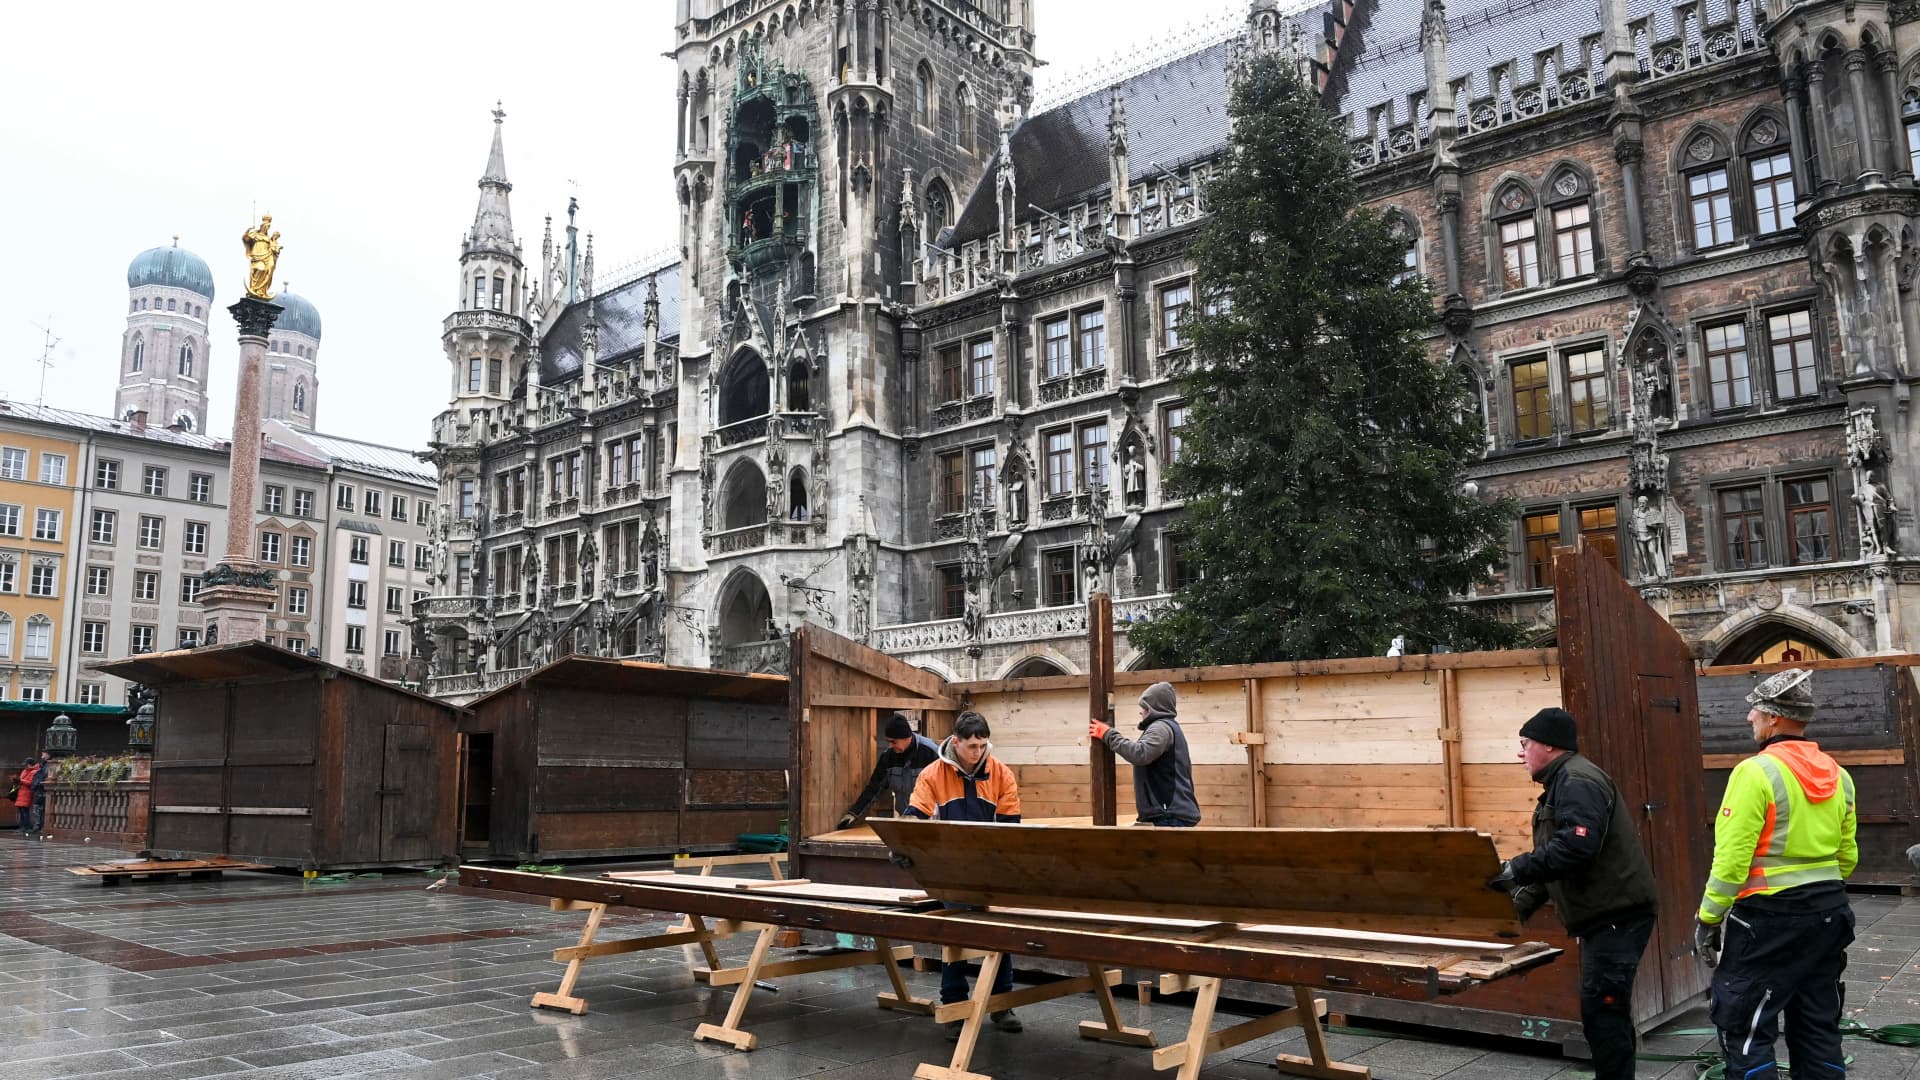 Workers dismantle a Christmas market booth at the Marienplatz in the center of Munich, southern Germany, on November 22, 2021.